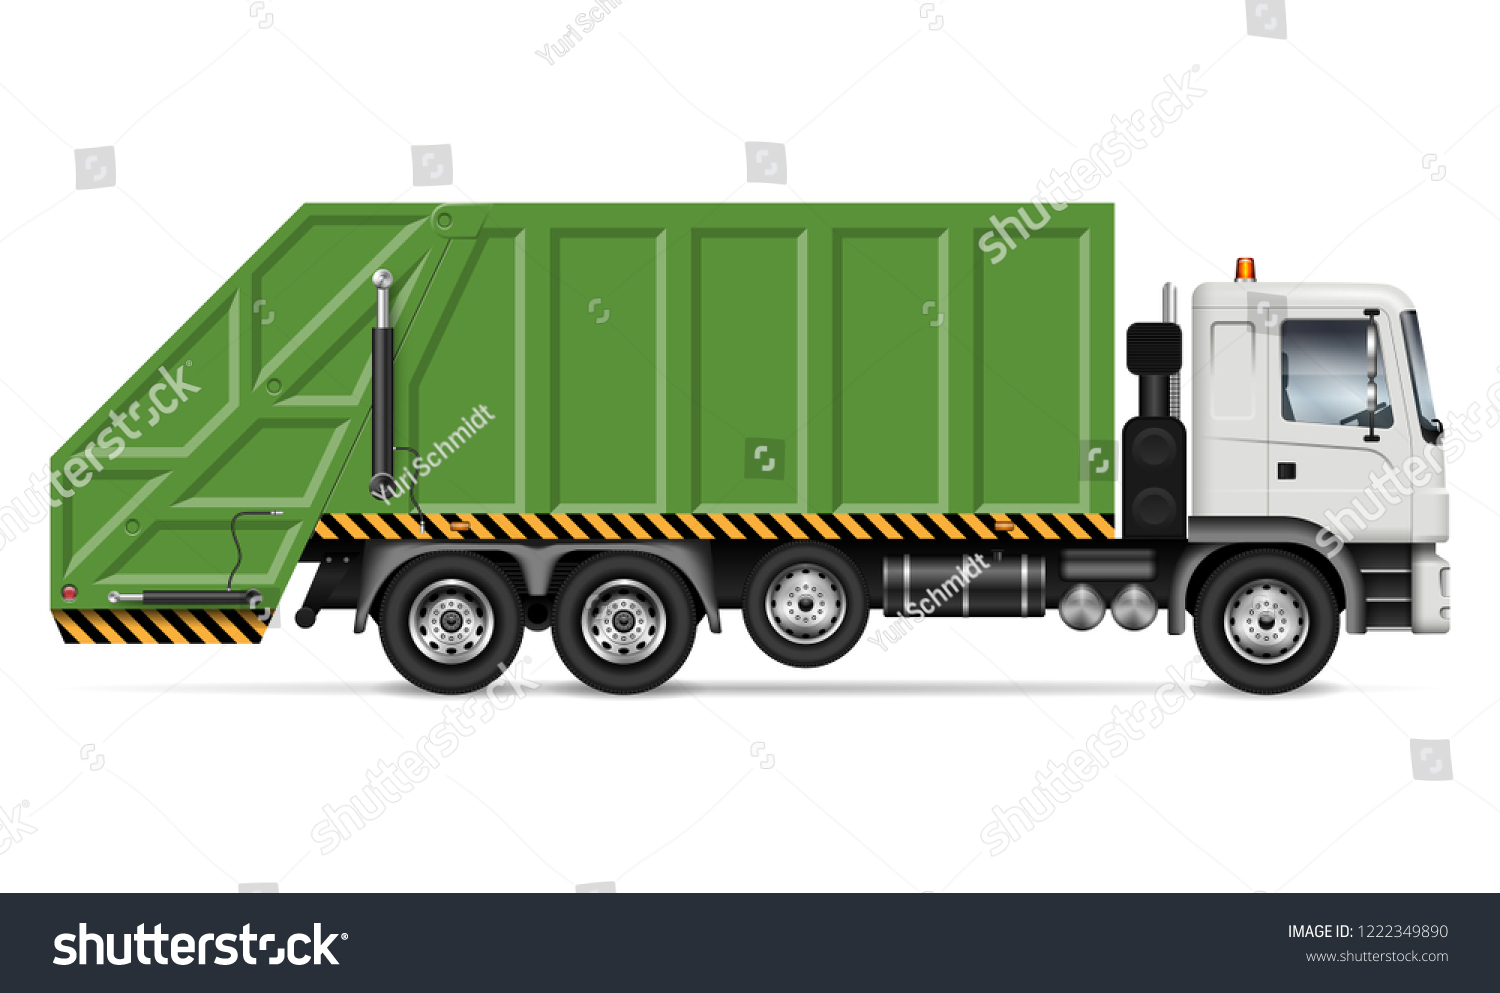 SVG of Realistic garbage truck vector mockup. Isolated template of dump lorry on white background for vehicle branding, corporate identity. View from right side, easy to editing and recolor. svg